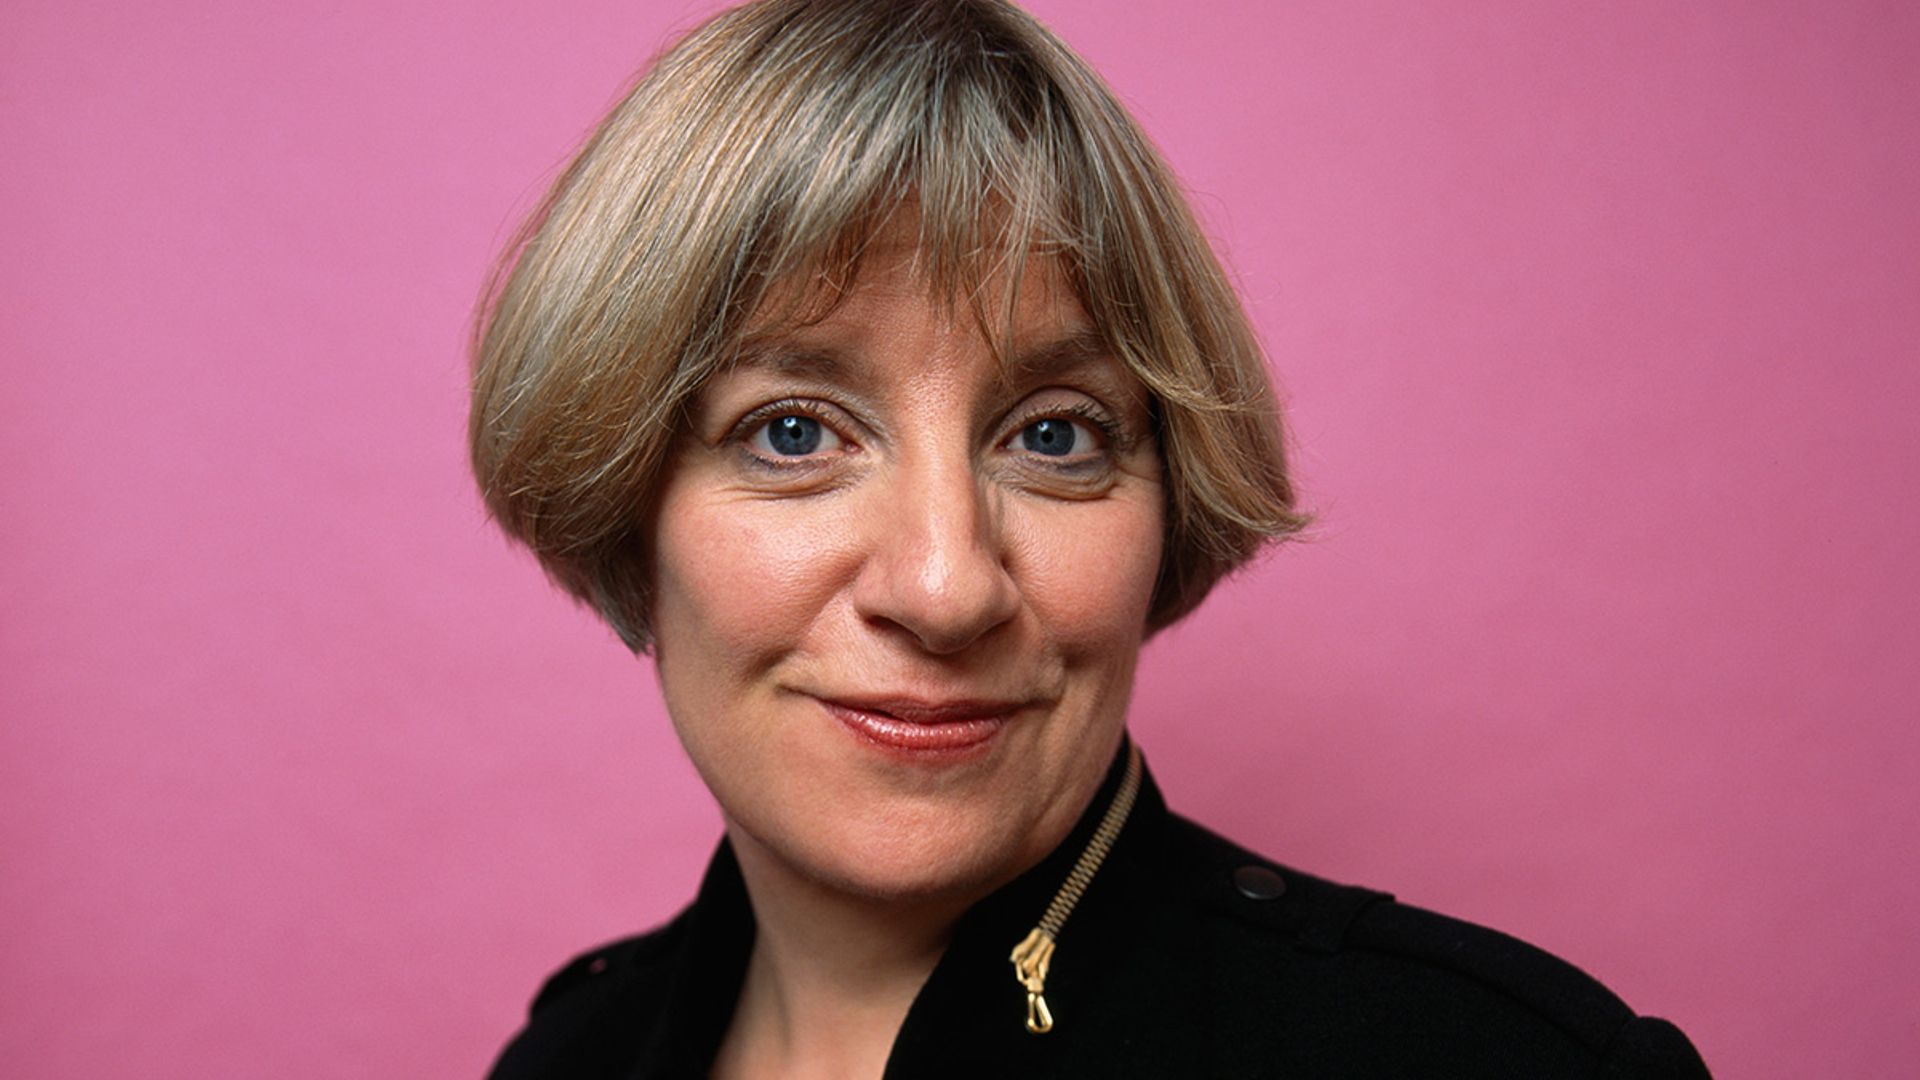 The story behind Victoria Wood's career, legacy and sad death